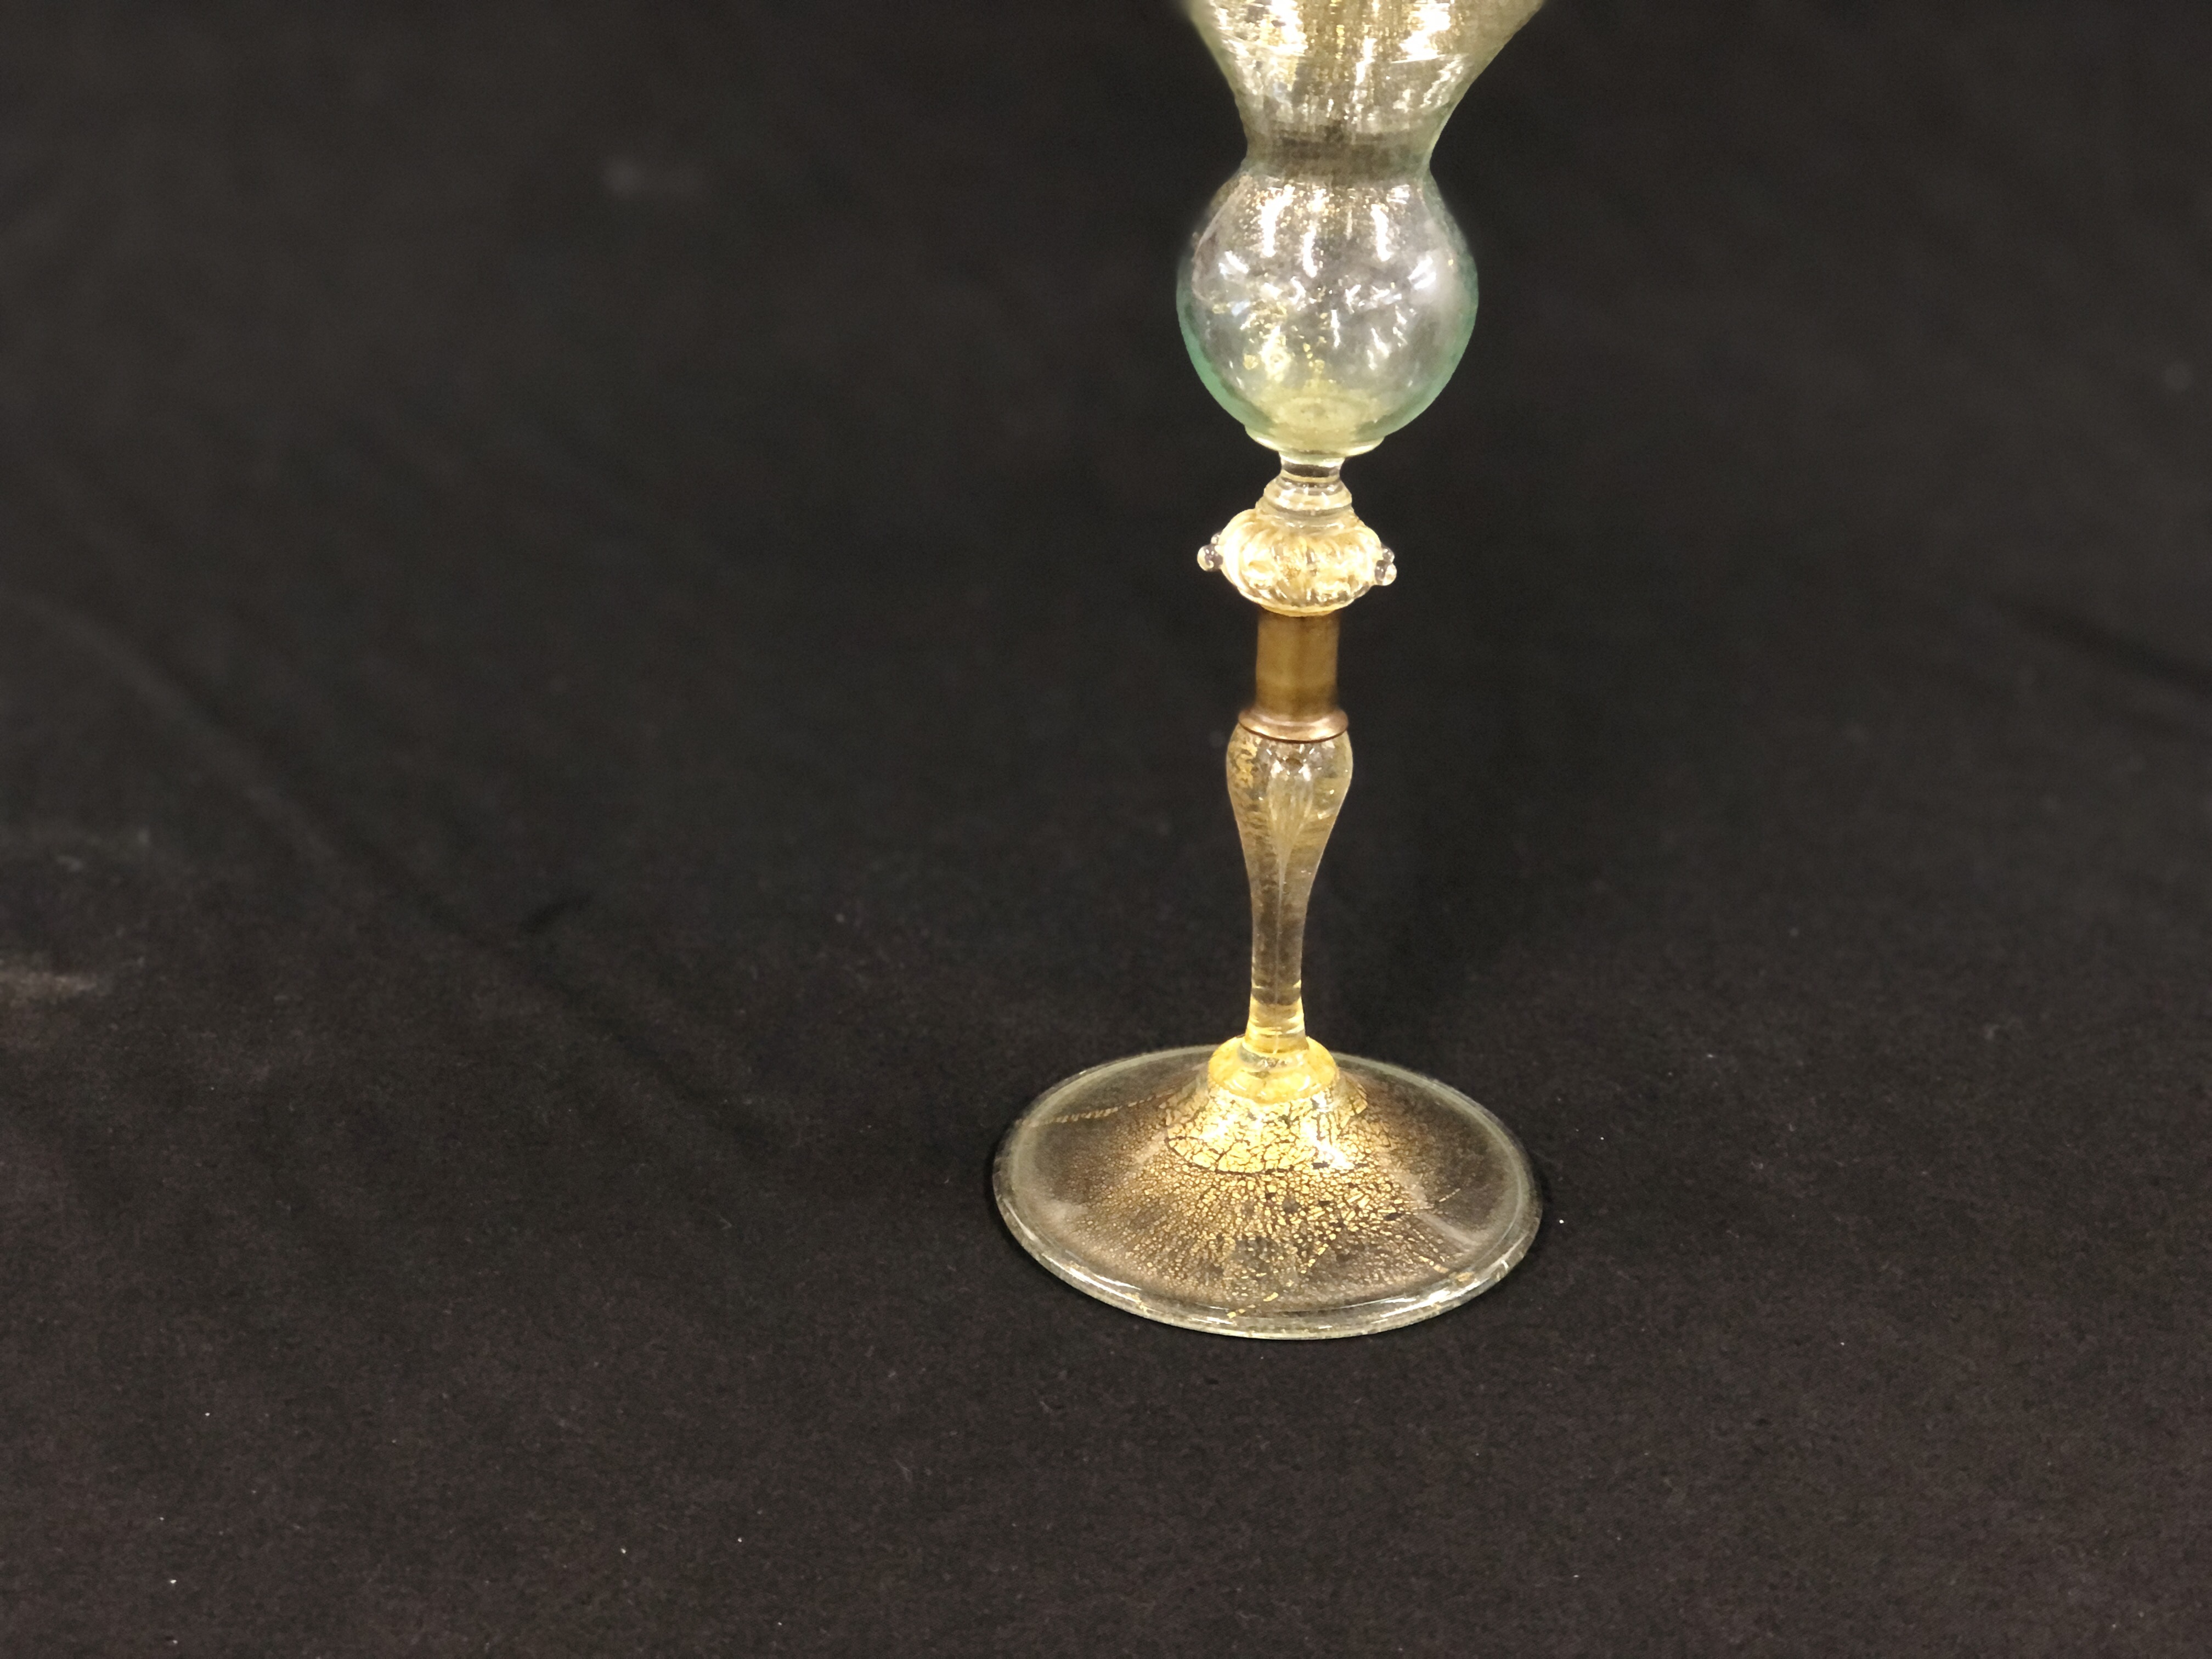 A VENETIAN GLASS WITH CONICAL BOWL, THE STEM WITH WHITE METAL COLLAR, 25.5CM HIGH. - Image 3 of 12